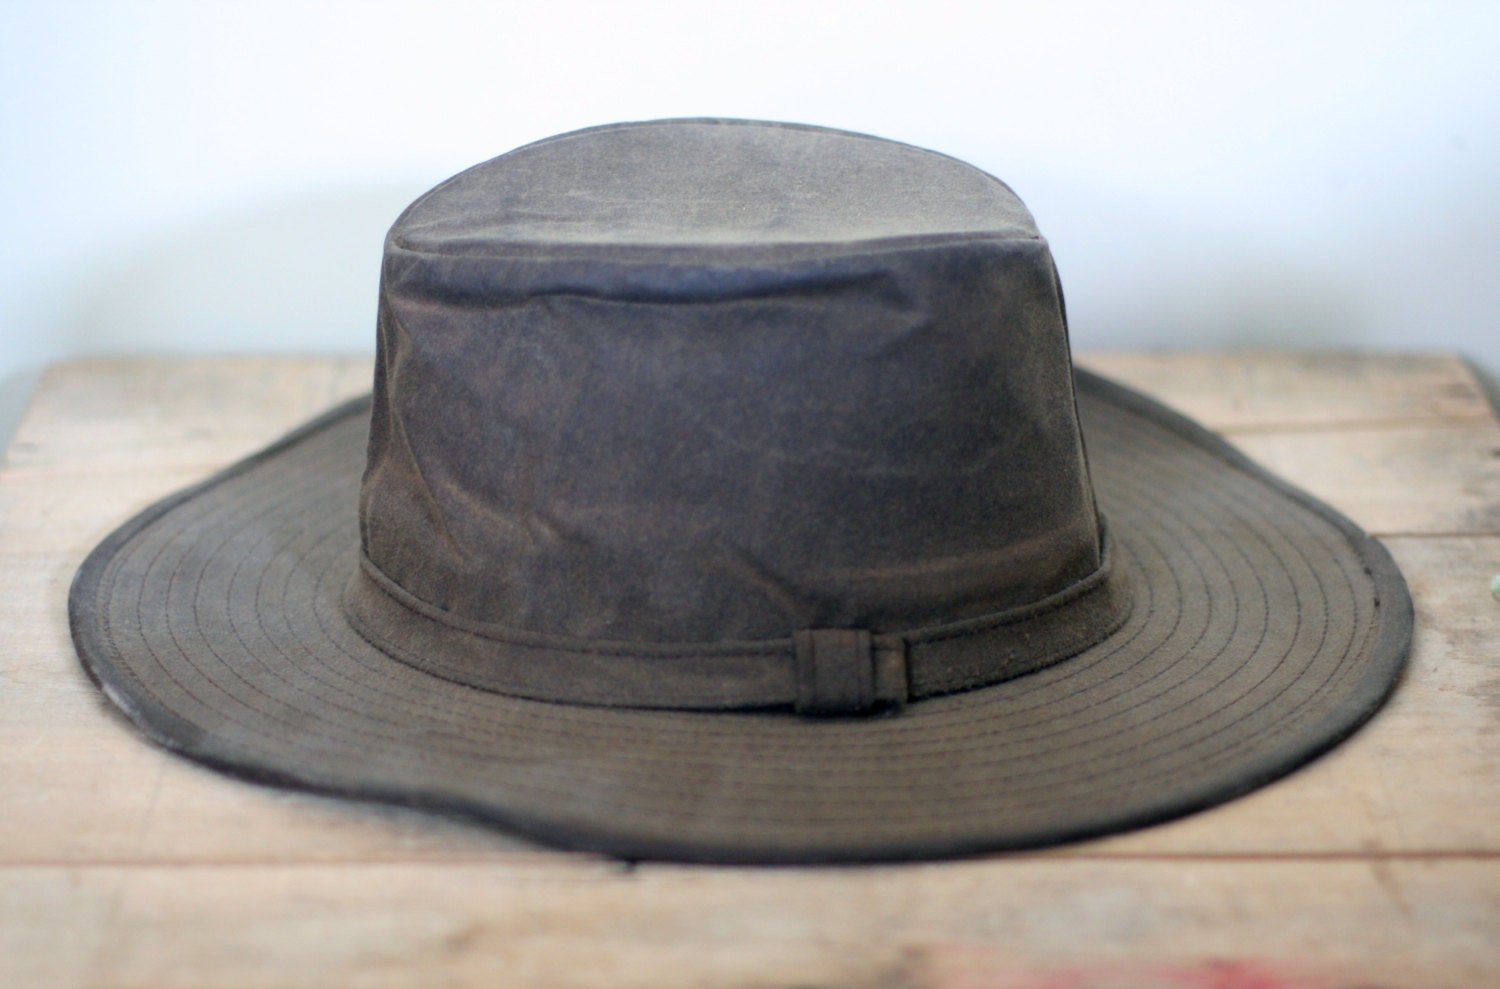 vintage australian outback hat size m by TomTomVintage on Etsy